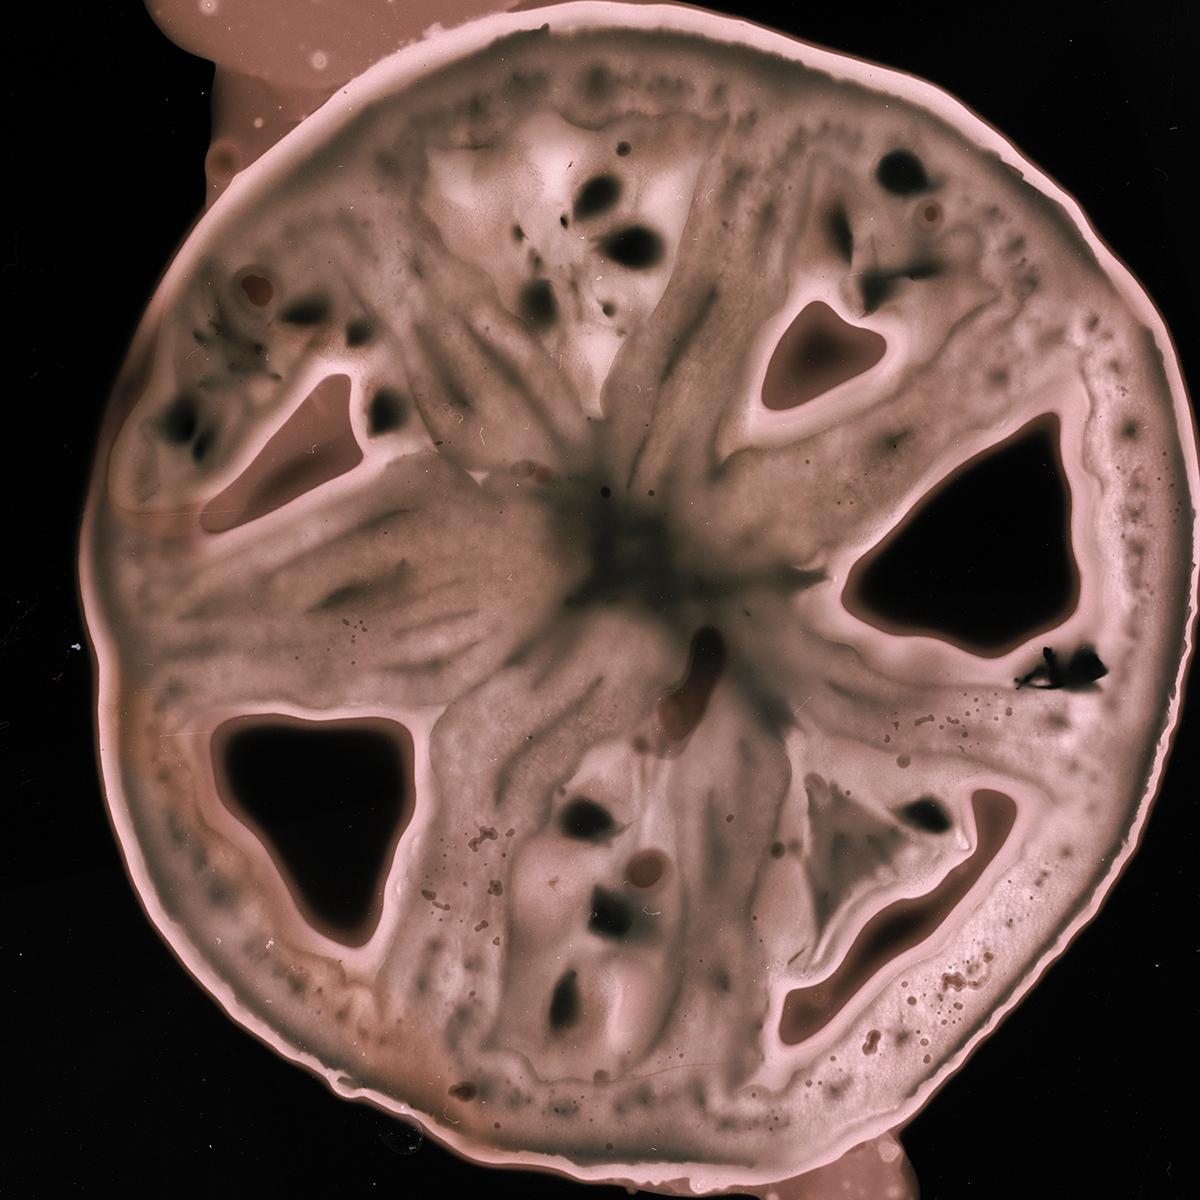 Cross section of a tomato documented with the alternative photographic technique of phytogramming in which the plant itself becomes the developer, is placed on the film and creates an image while exposed to sunlight.